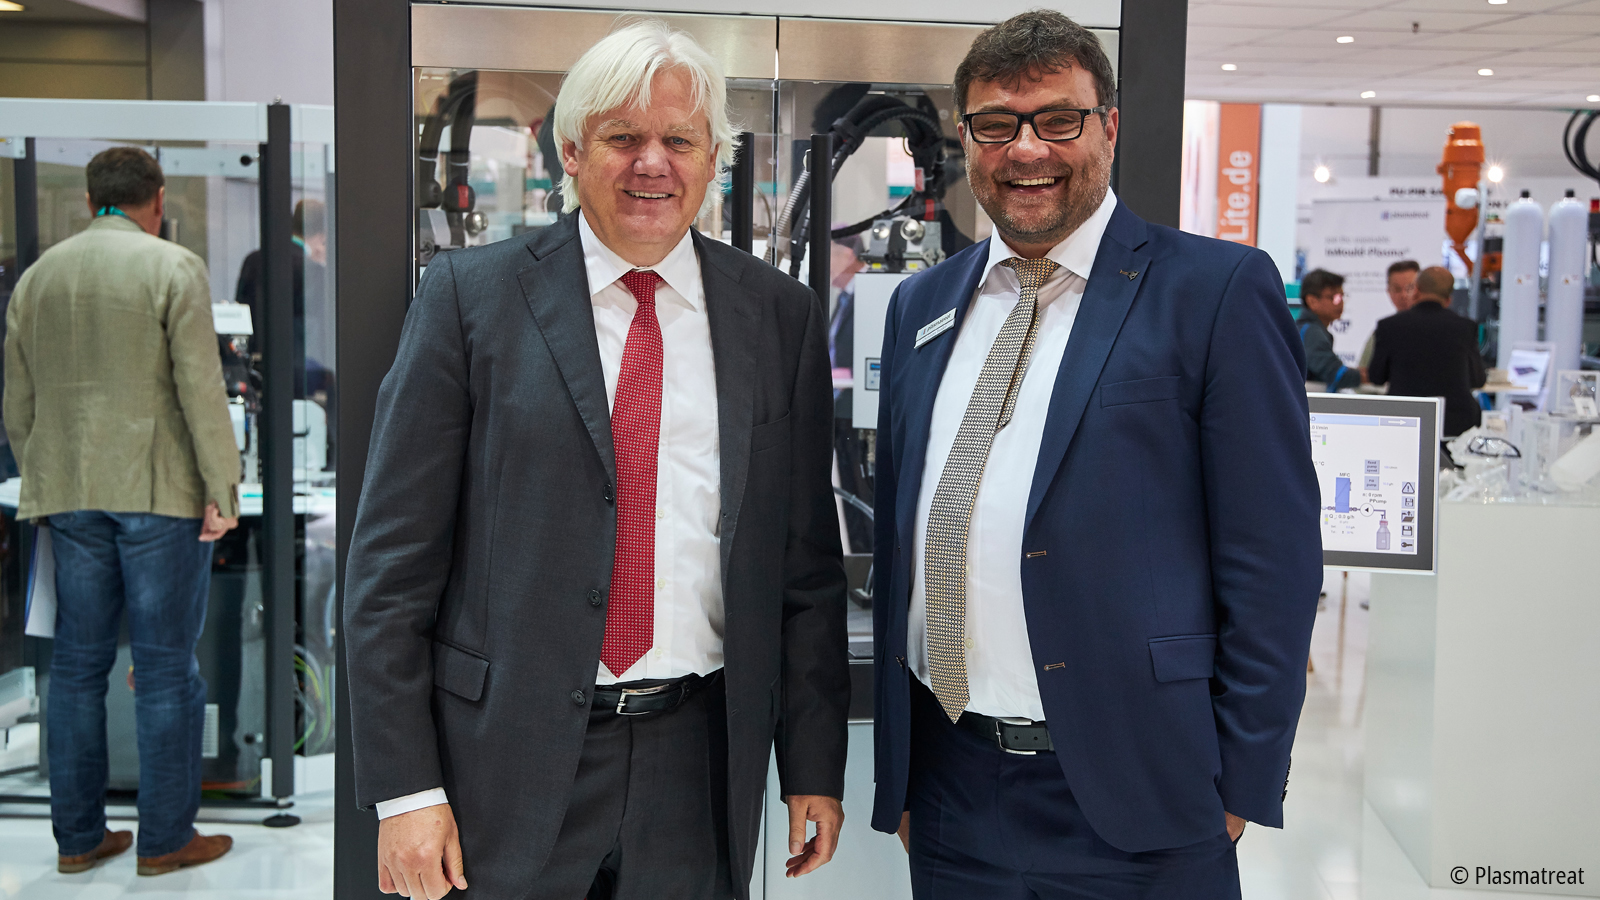 Christian Buske (right), CEO of Plasmatreat, and Hans Beckhoff (left), owner and Managing Director of Beckhoff Automation, were delighted by the successful unveiling of the XPlanar-based plasma treatment unit at the K 2019 trade show in Düsseldorf.